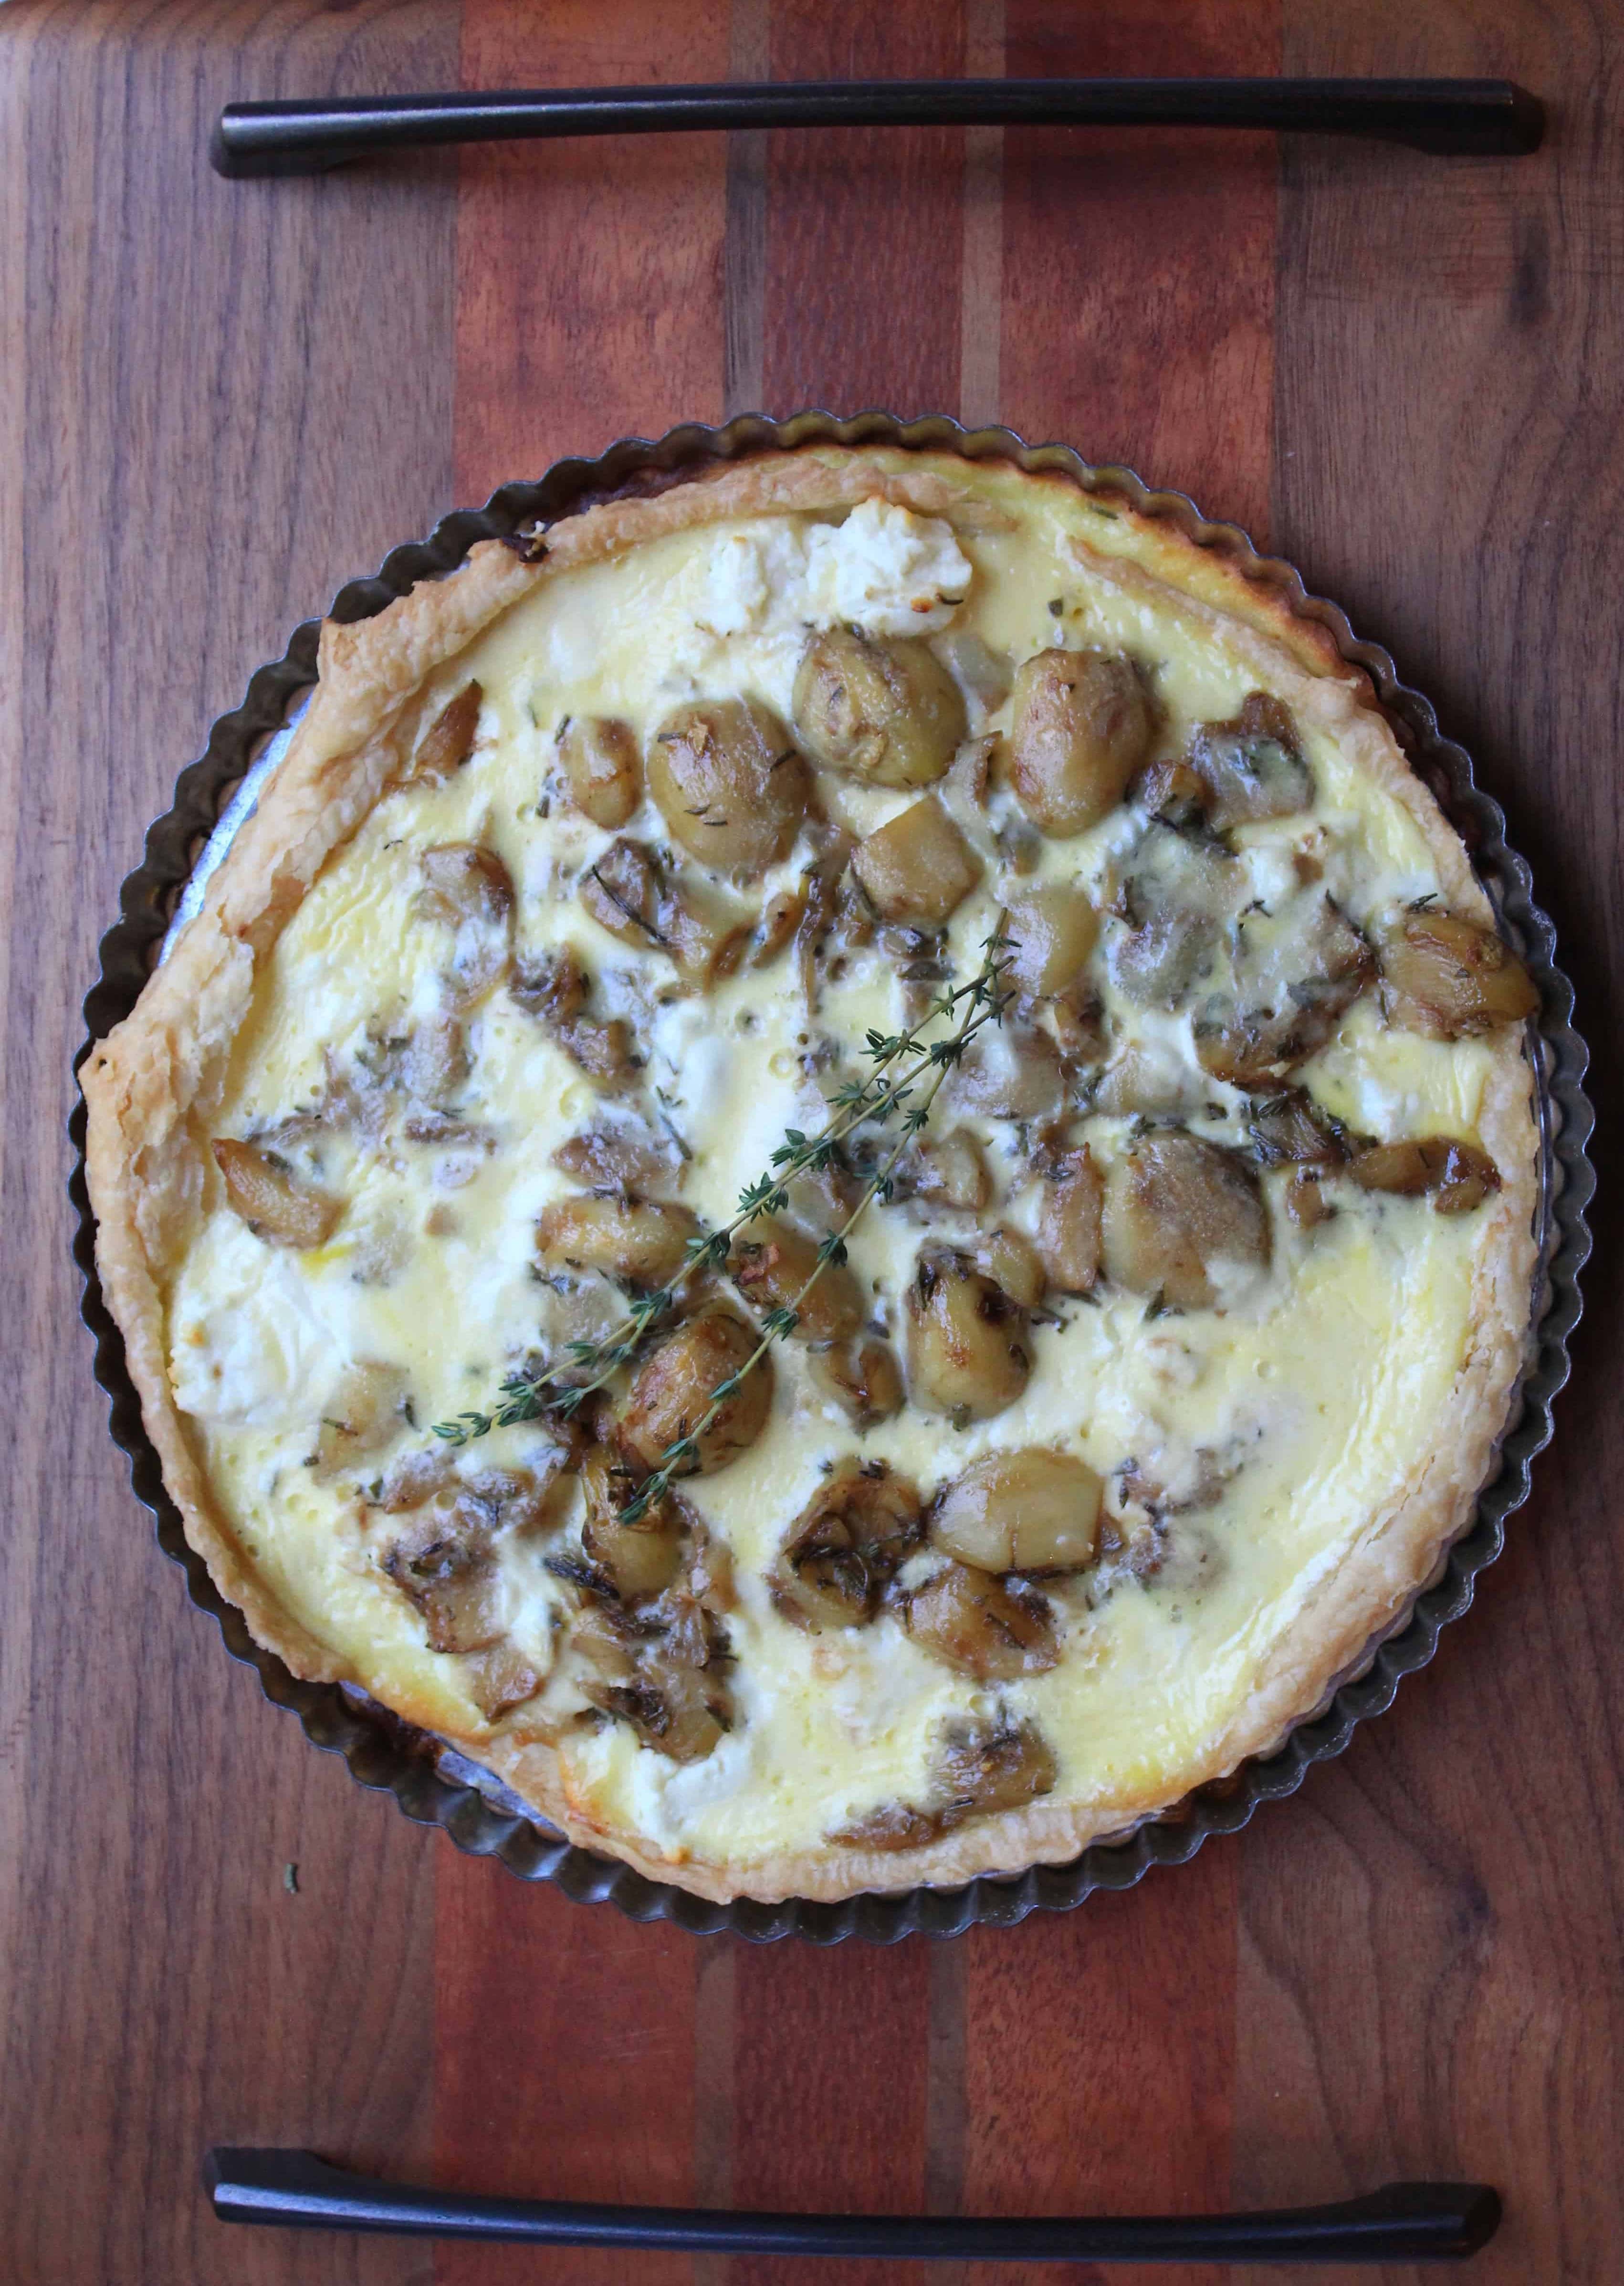 This Caramelized Garlic Tart is absolutely heavenly! The garlic is caramelized with rosemary, thyme, and balsamic, leaving it herbaceously sweet. Two different types of goat cheese mean extra flavor.